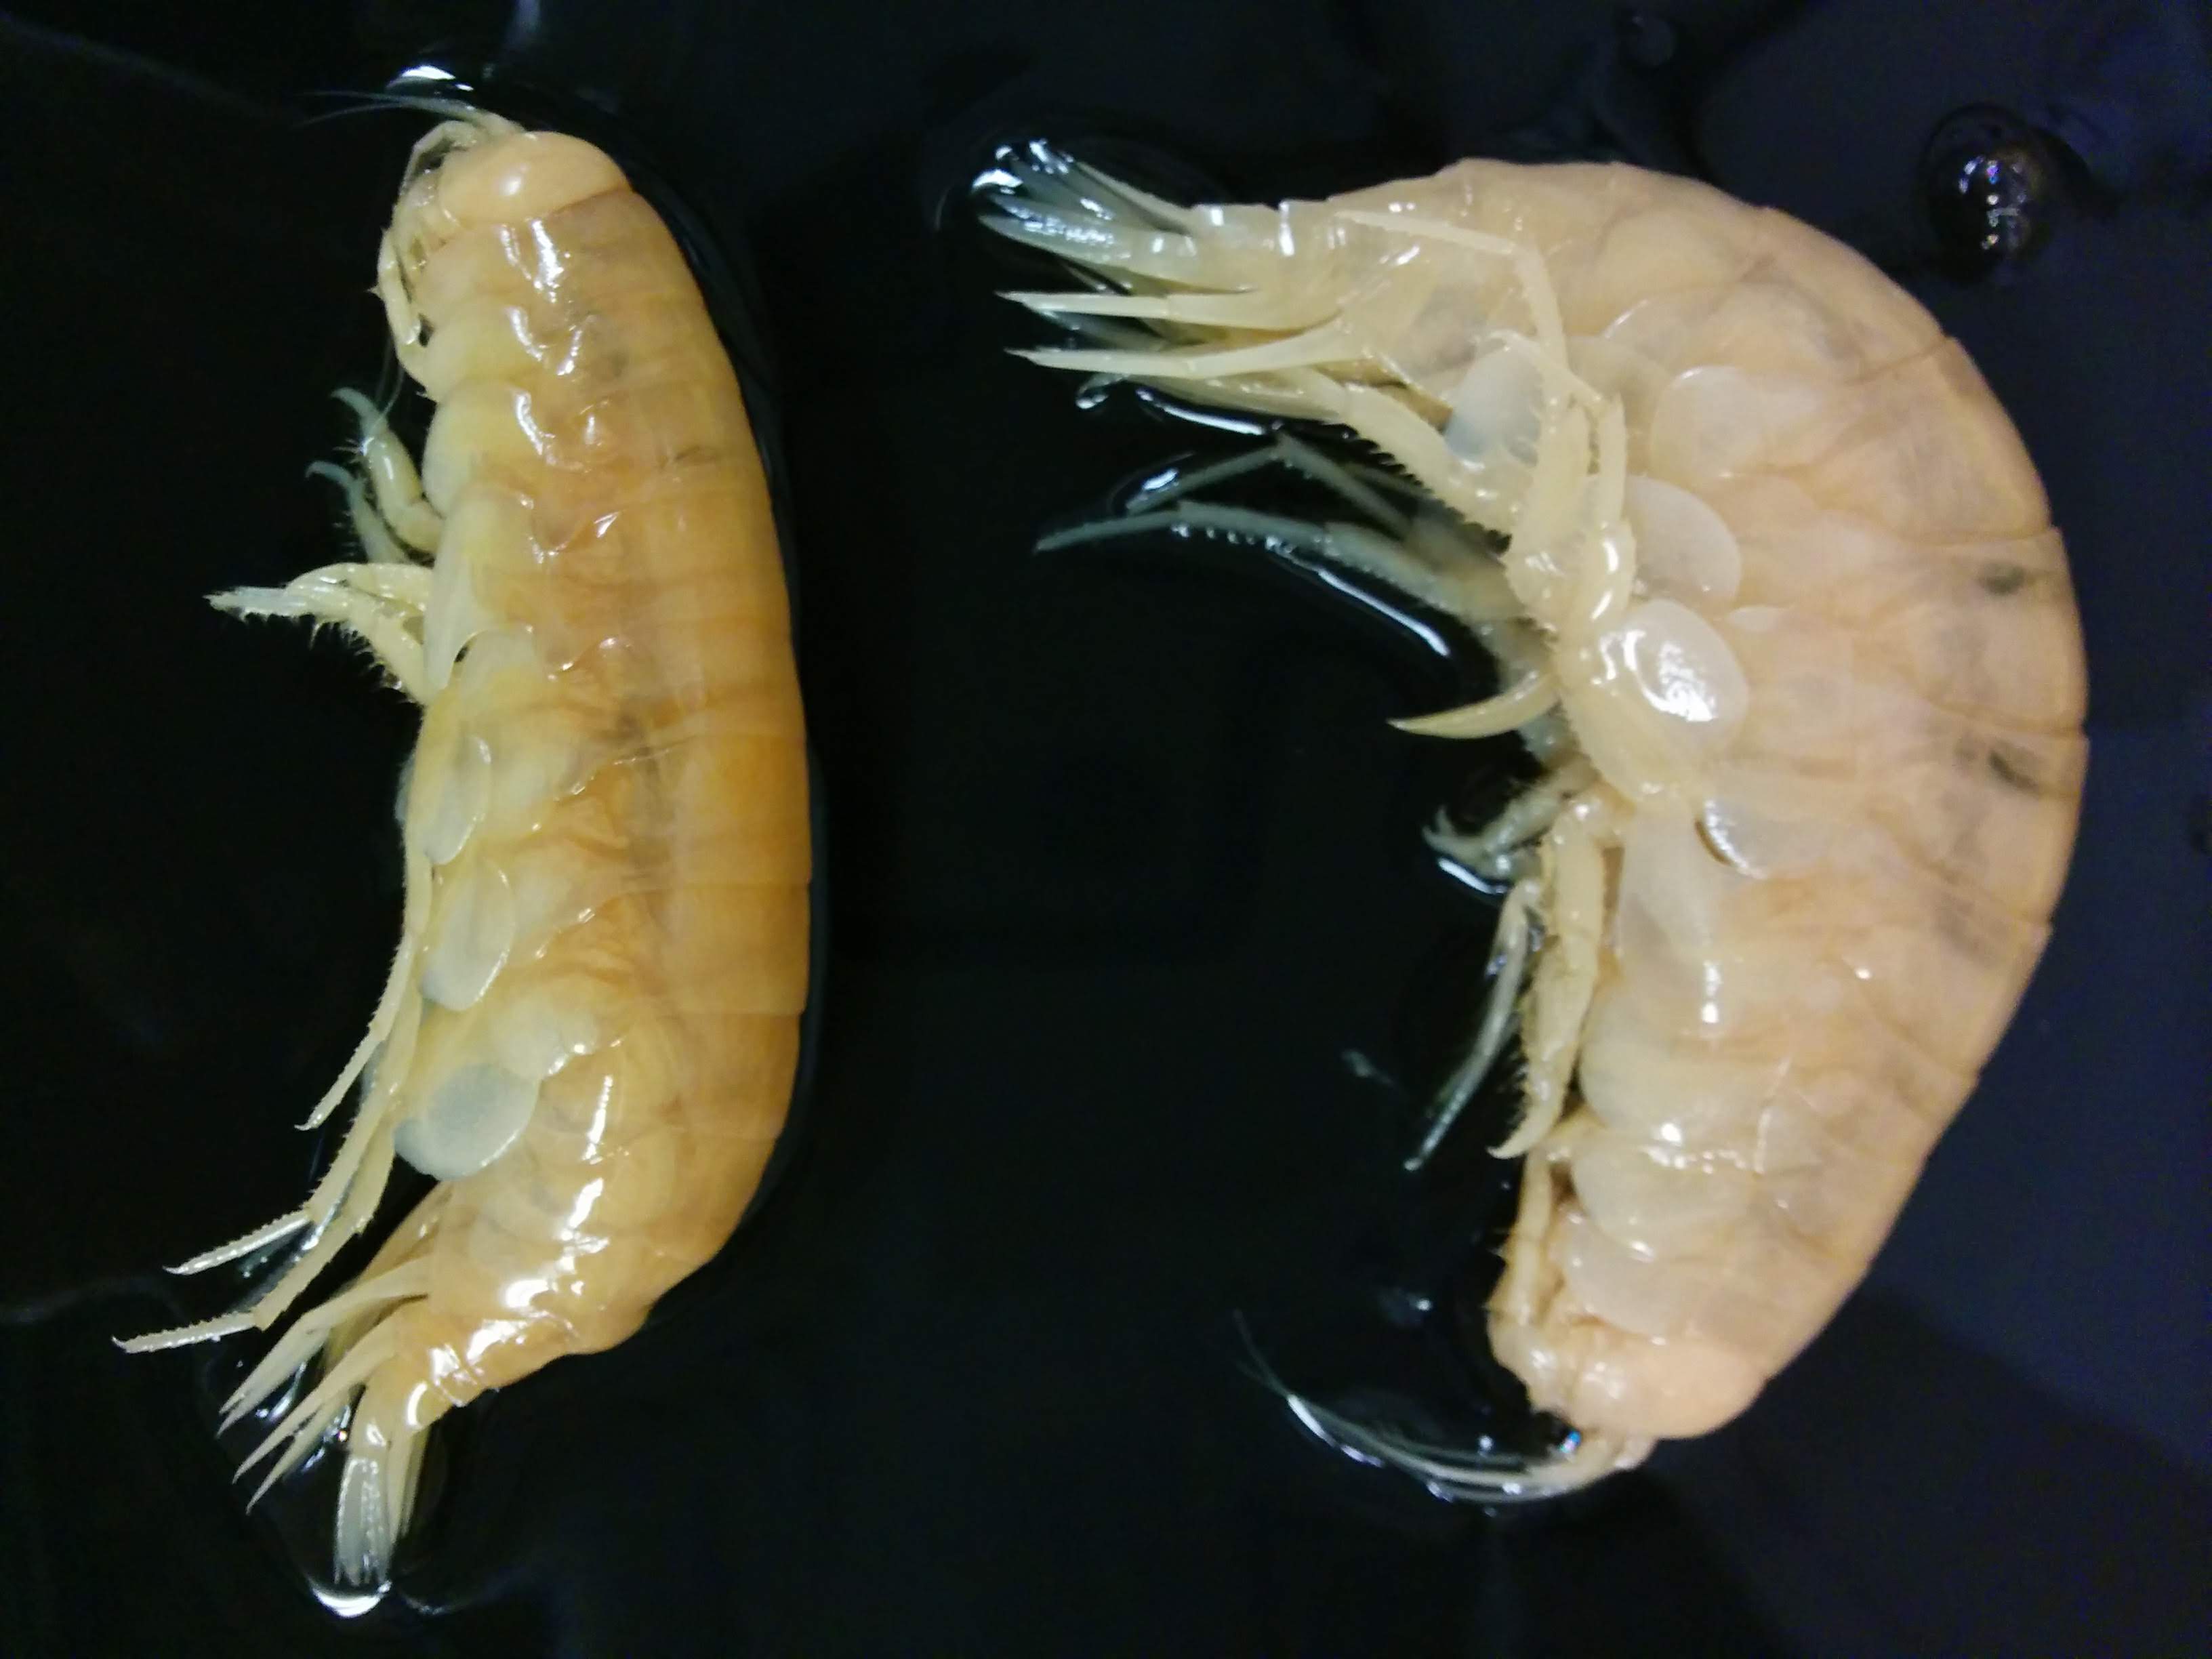 These shrimp-like crustaceans were collected 8,367 m deep in the New Britain Trench off Papua New Guinea. Giant amphipods (Alicella gigantea) are important scavengers in deep-sea ecosystems, and these specimens were caught using a trap baited with fish. Image: Charlotte Seid/Scripps Institution of Oceanography University of California San Diego.